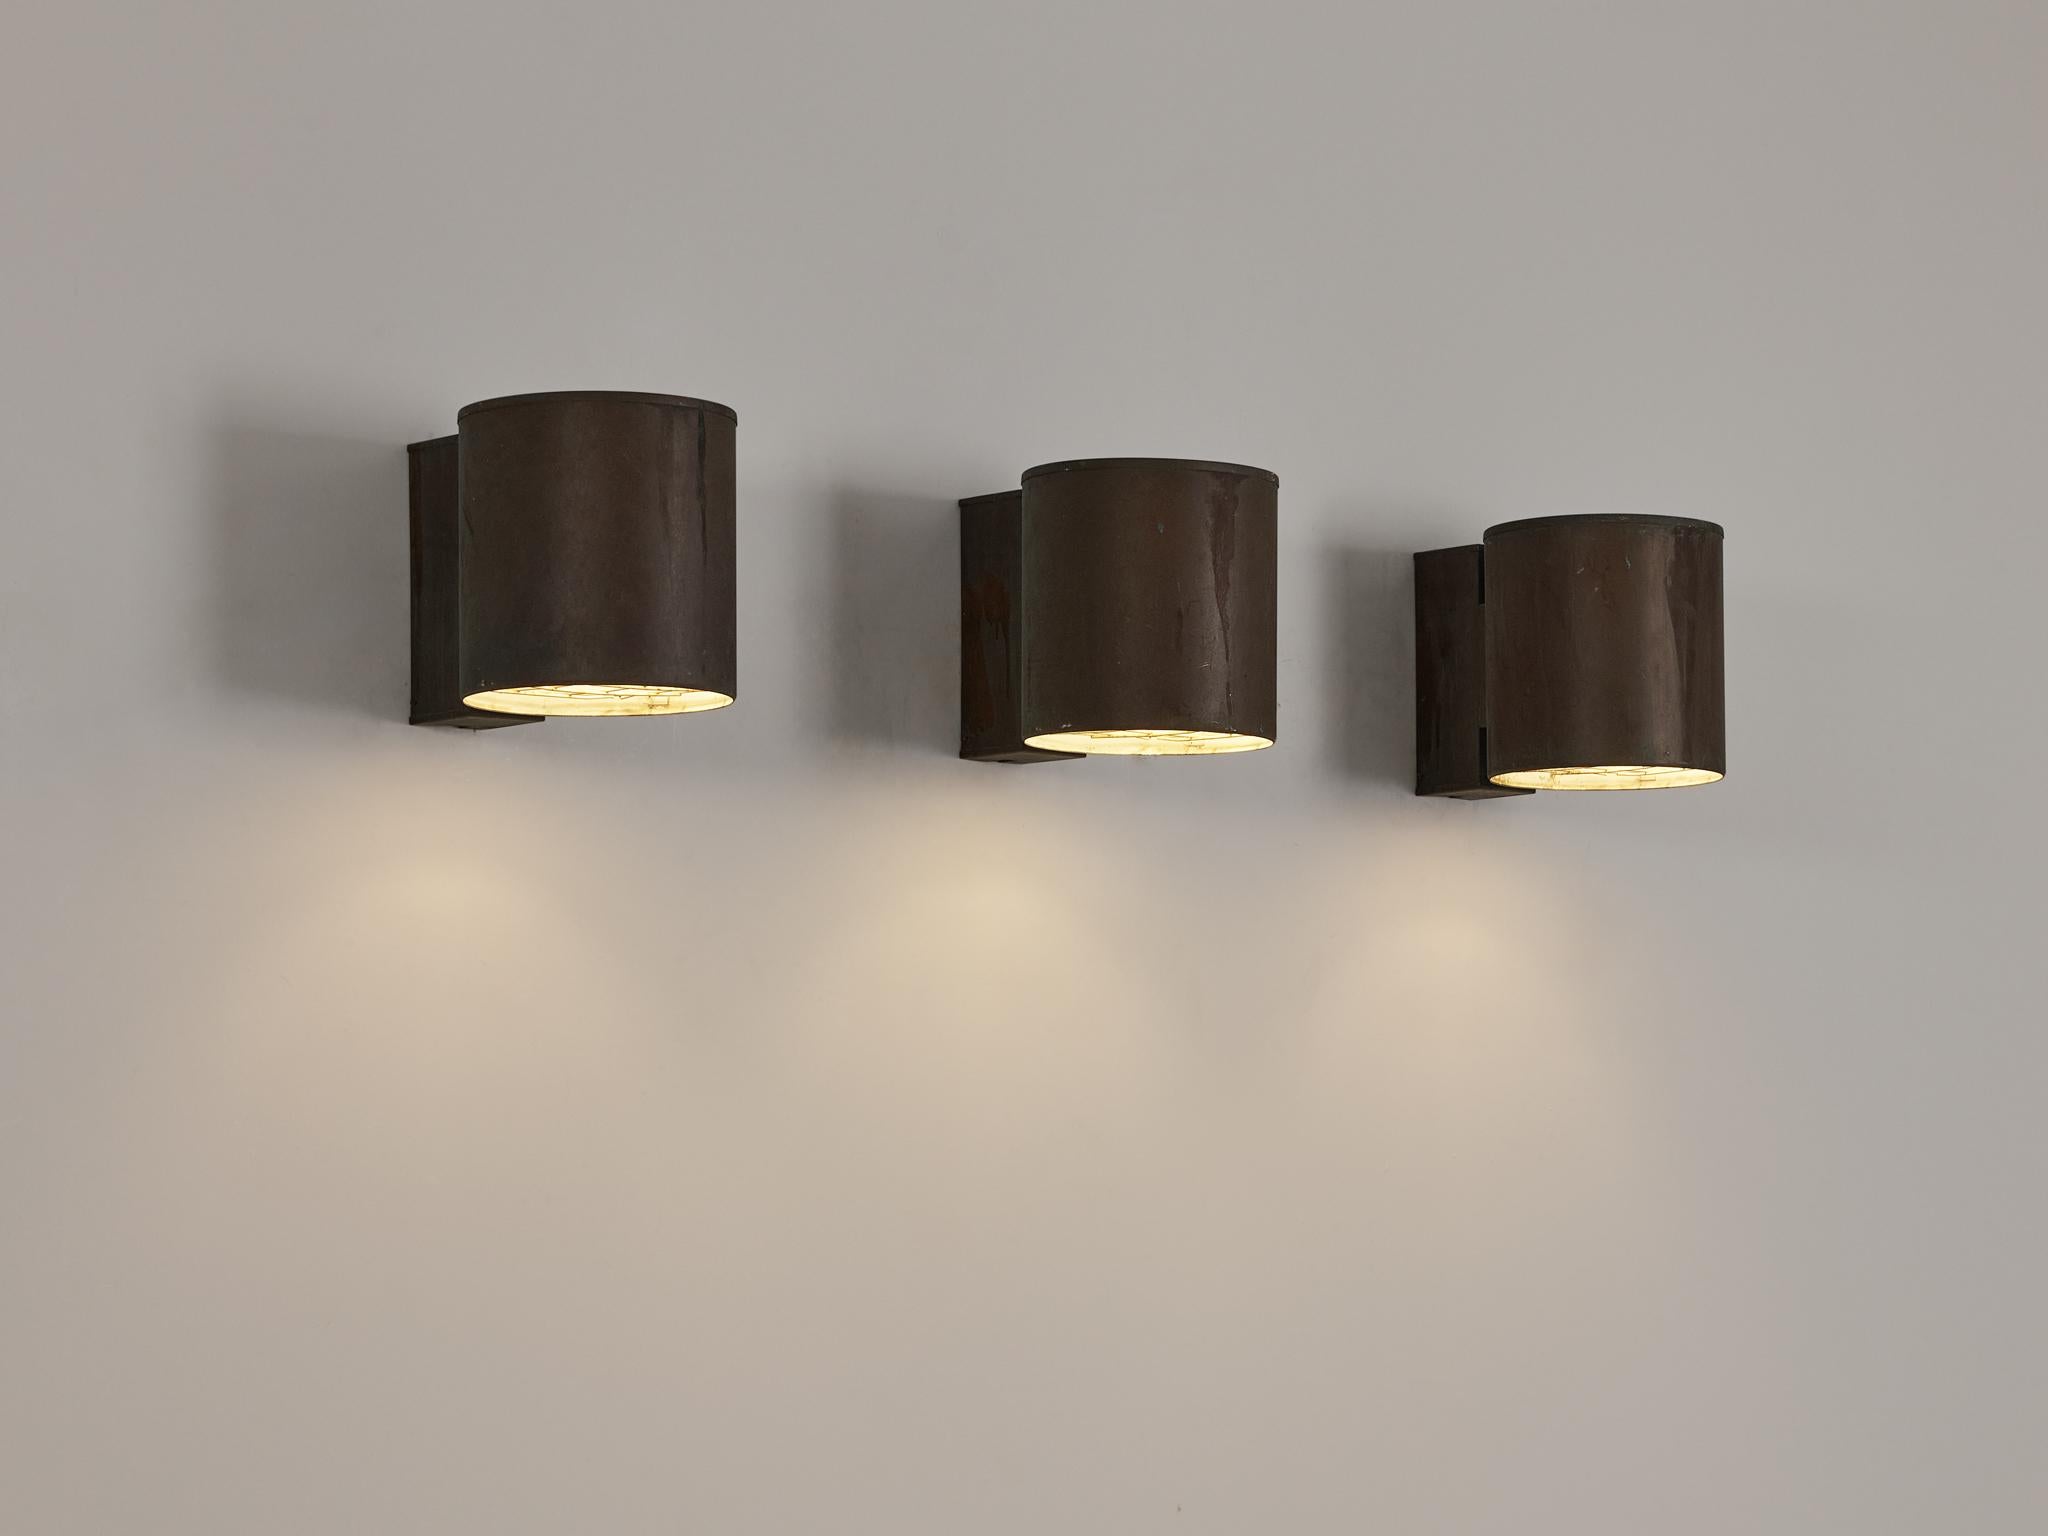 Falkenbergs Belysning, large wall lamps, patinated copper, coated steel, Sweden, 1960s

Grand Swedish wall lights in patinated copper. The cylindric shade directs the light downwards. The authentic look of the patinated copper creates a vividly